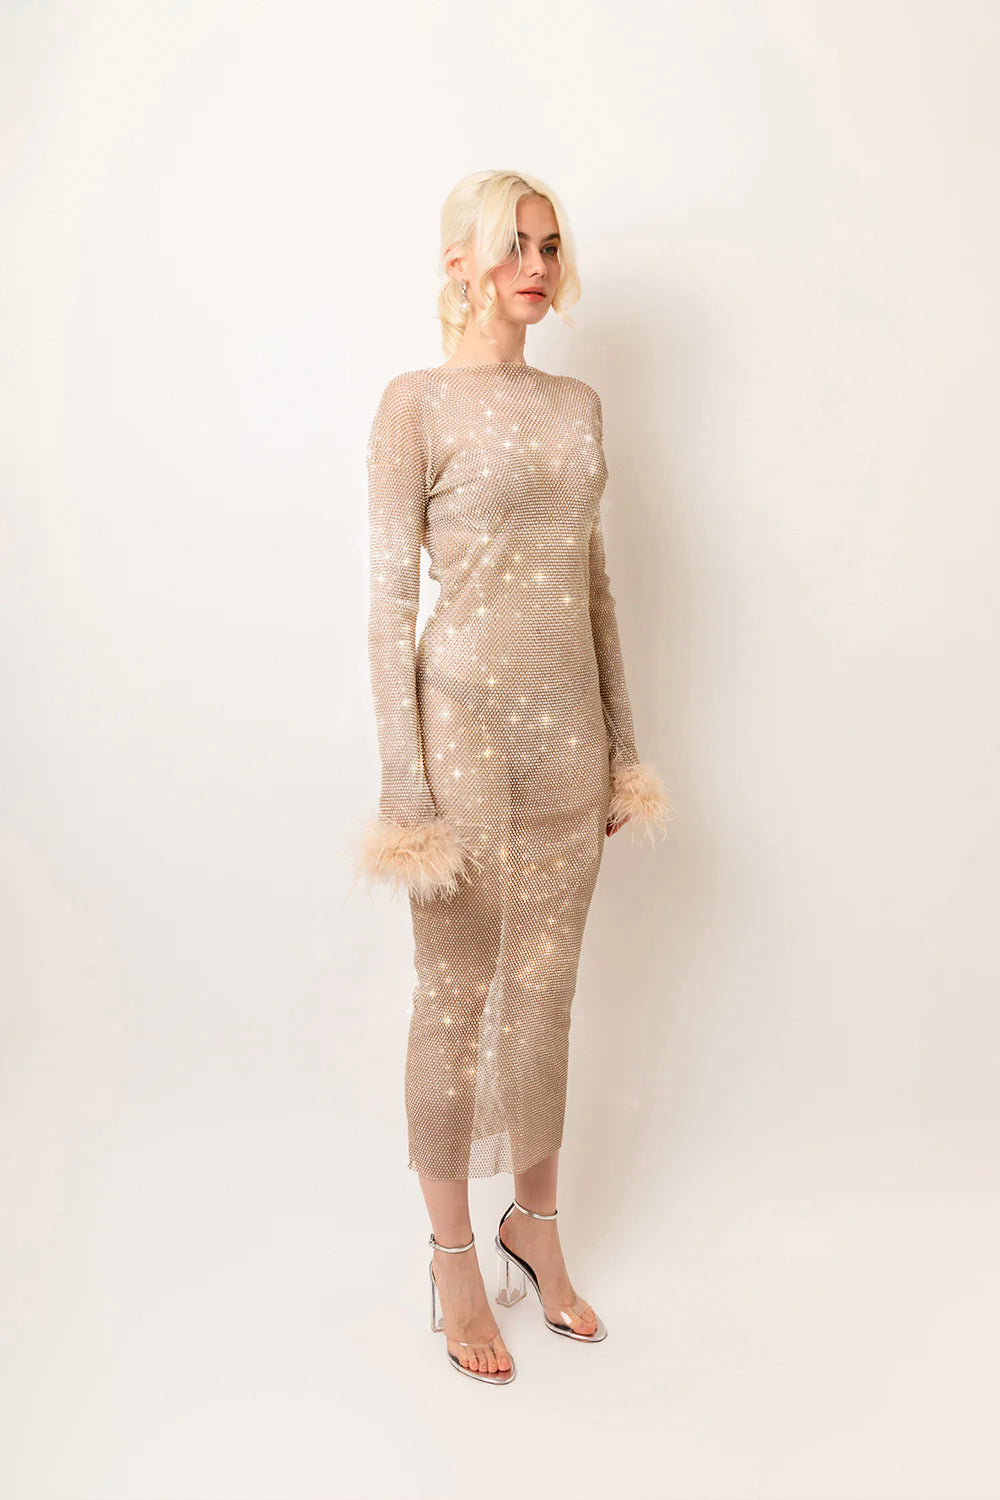 Seville Champagne Rhinestone Maxi Dress: A Stunning Embellished Mesh Dress with Long Sleeves and Feather Trim | AmyLynn